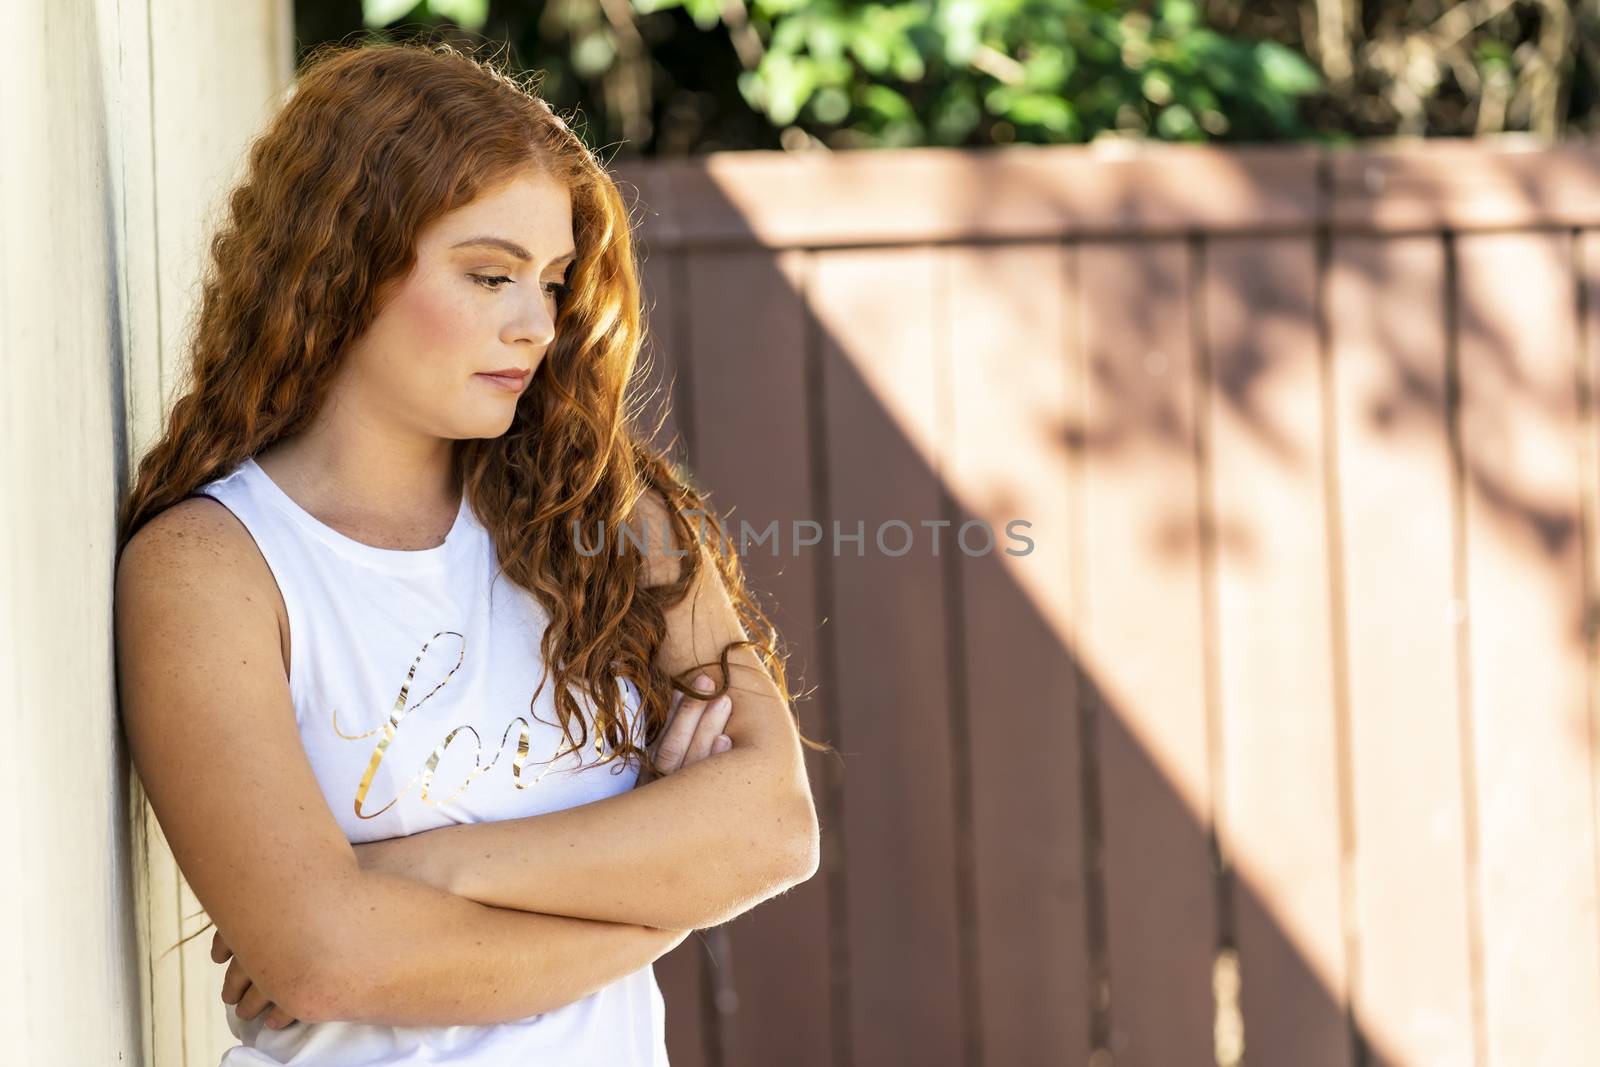 A beautiful redhead model poses outdoors during an autumn day